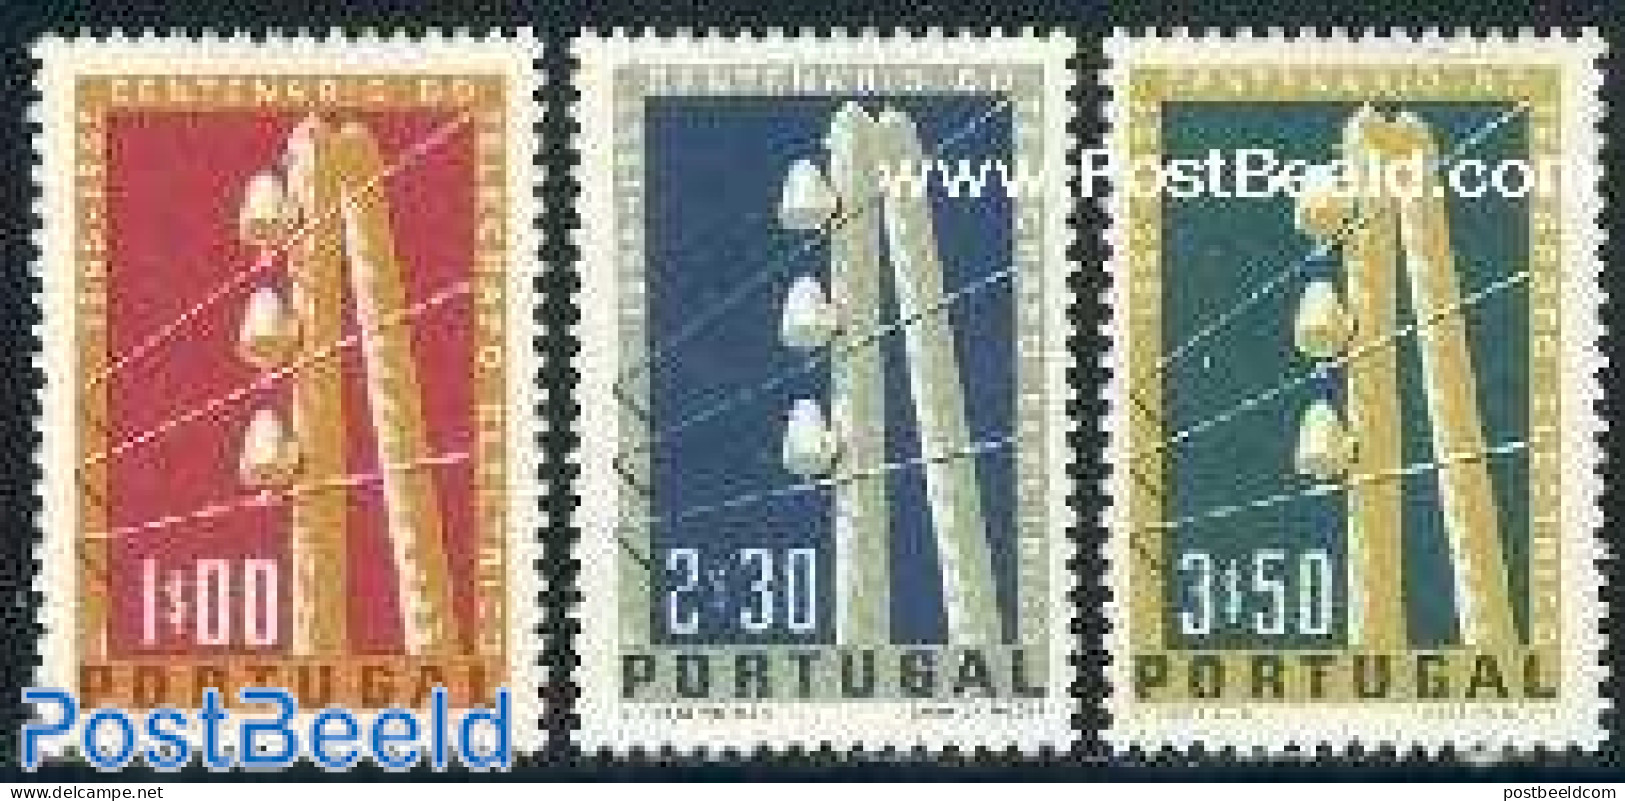 Portugal 1955 Telegraph Centenary 3v, Mint NH, Science - Telecommunication - Unused Stamps